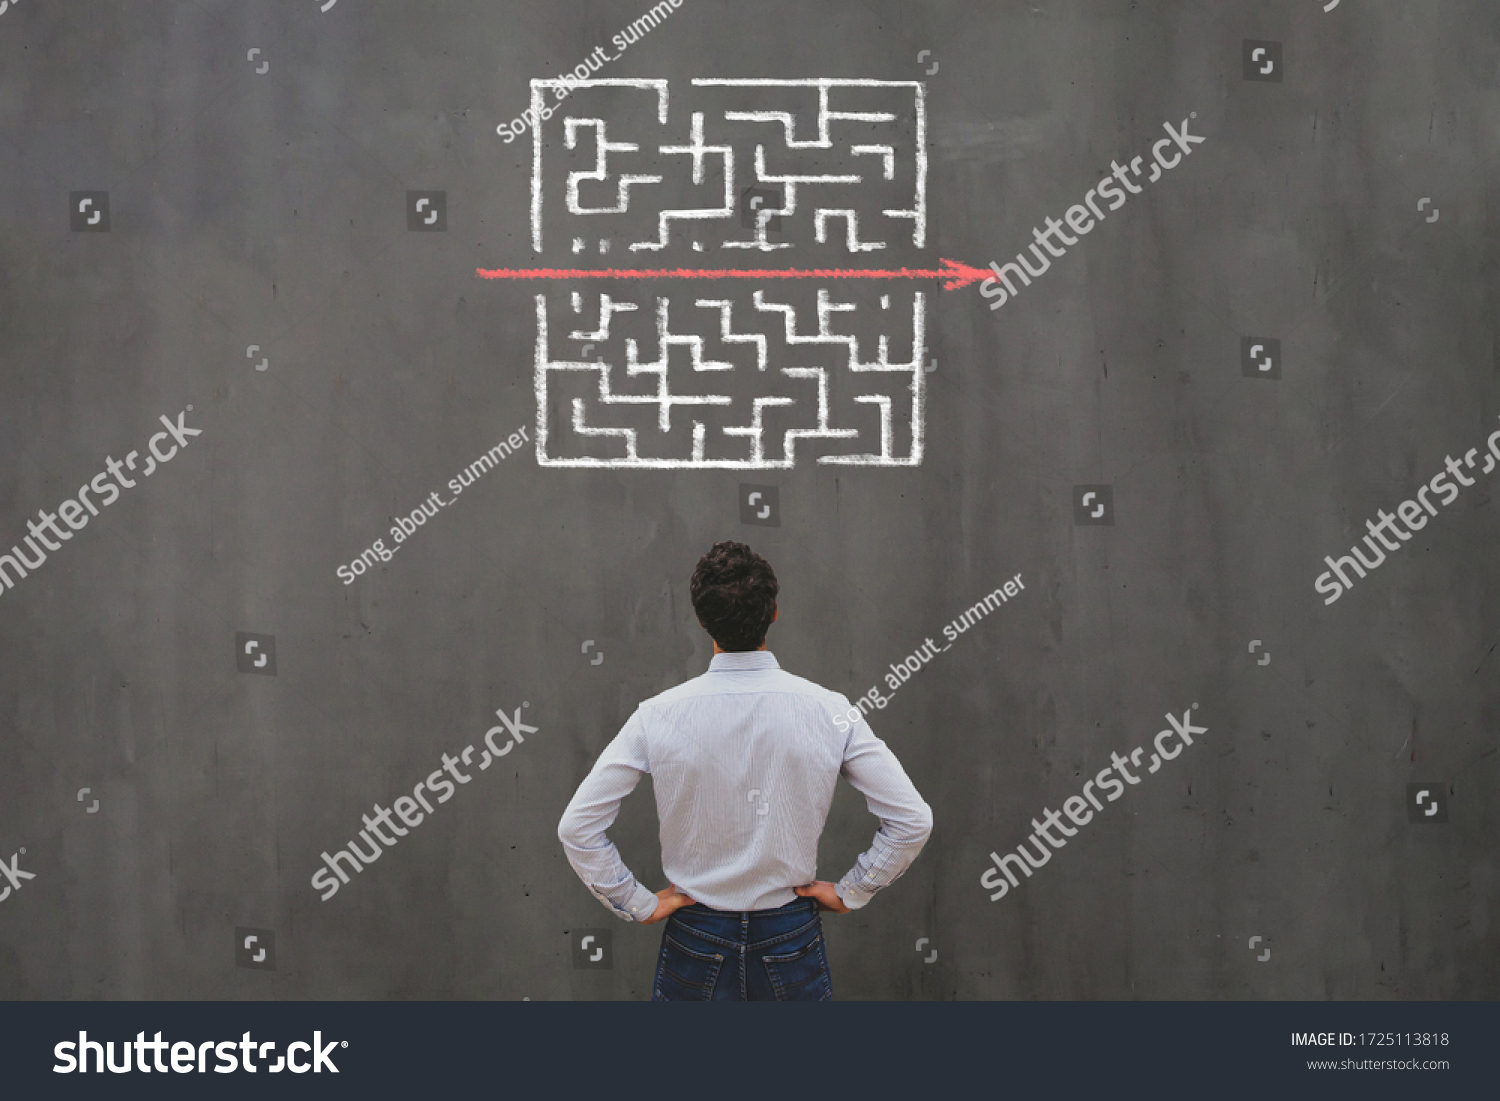 simple easy fast solution concept, problem solving, business man thinking about exit from complex labyrinth maze #1725113818